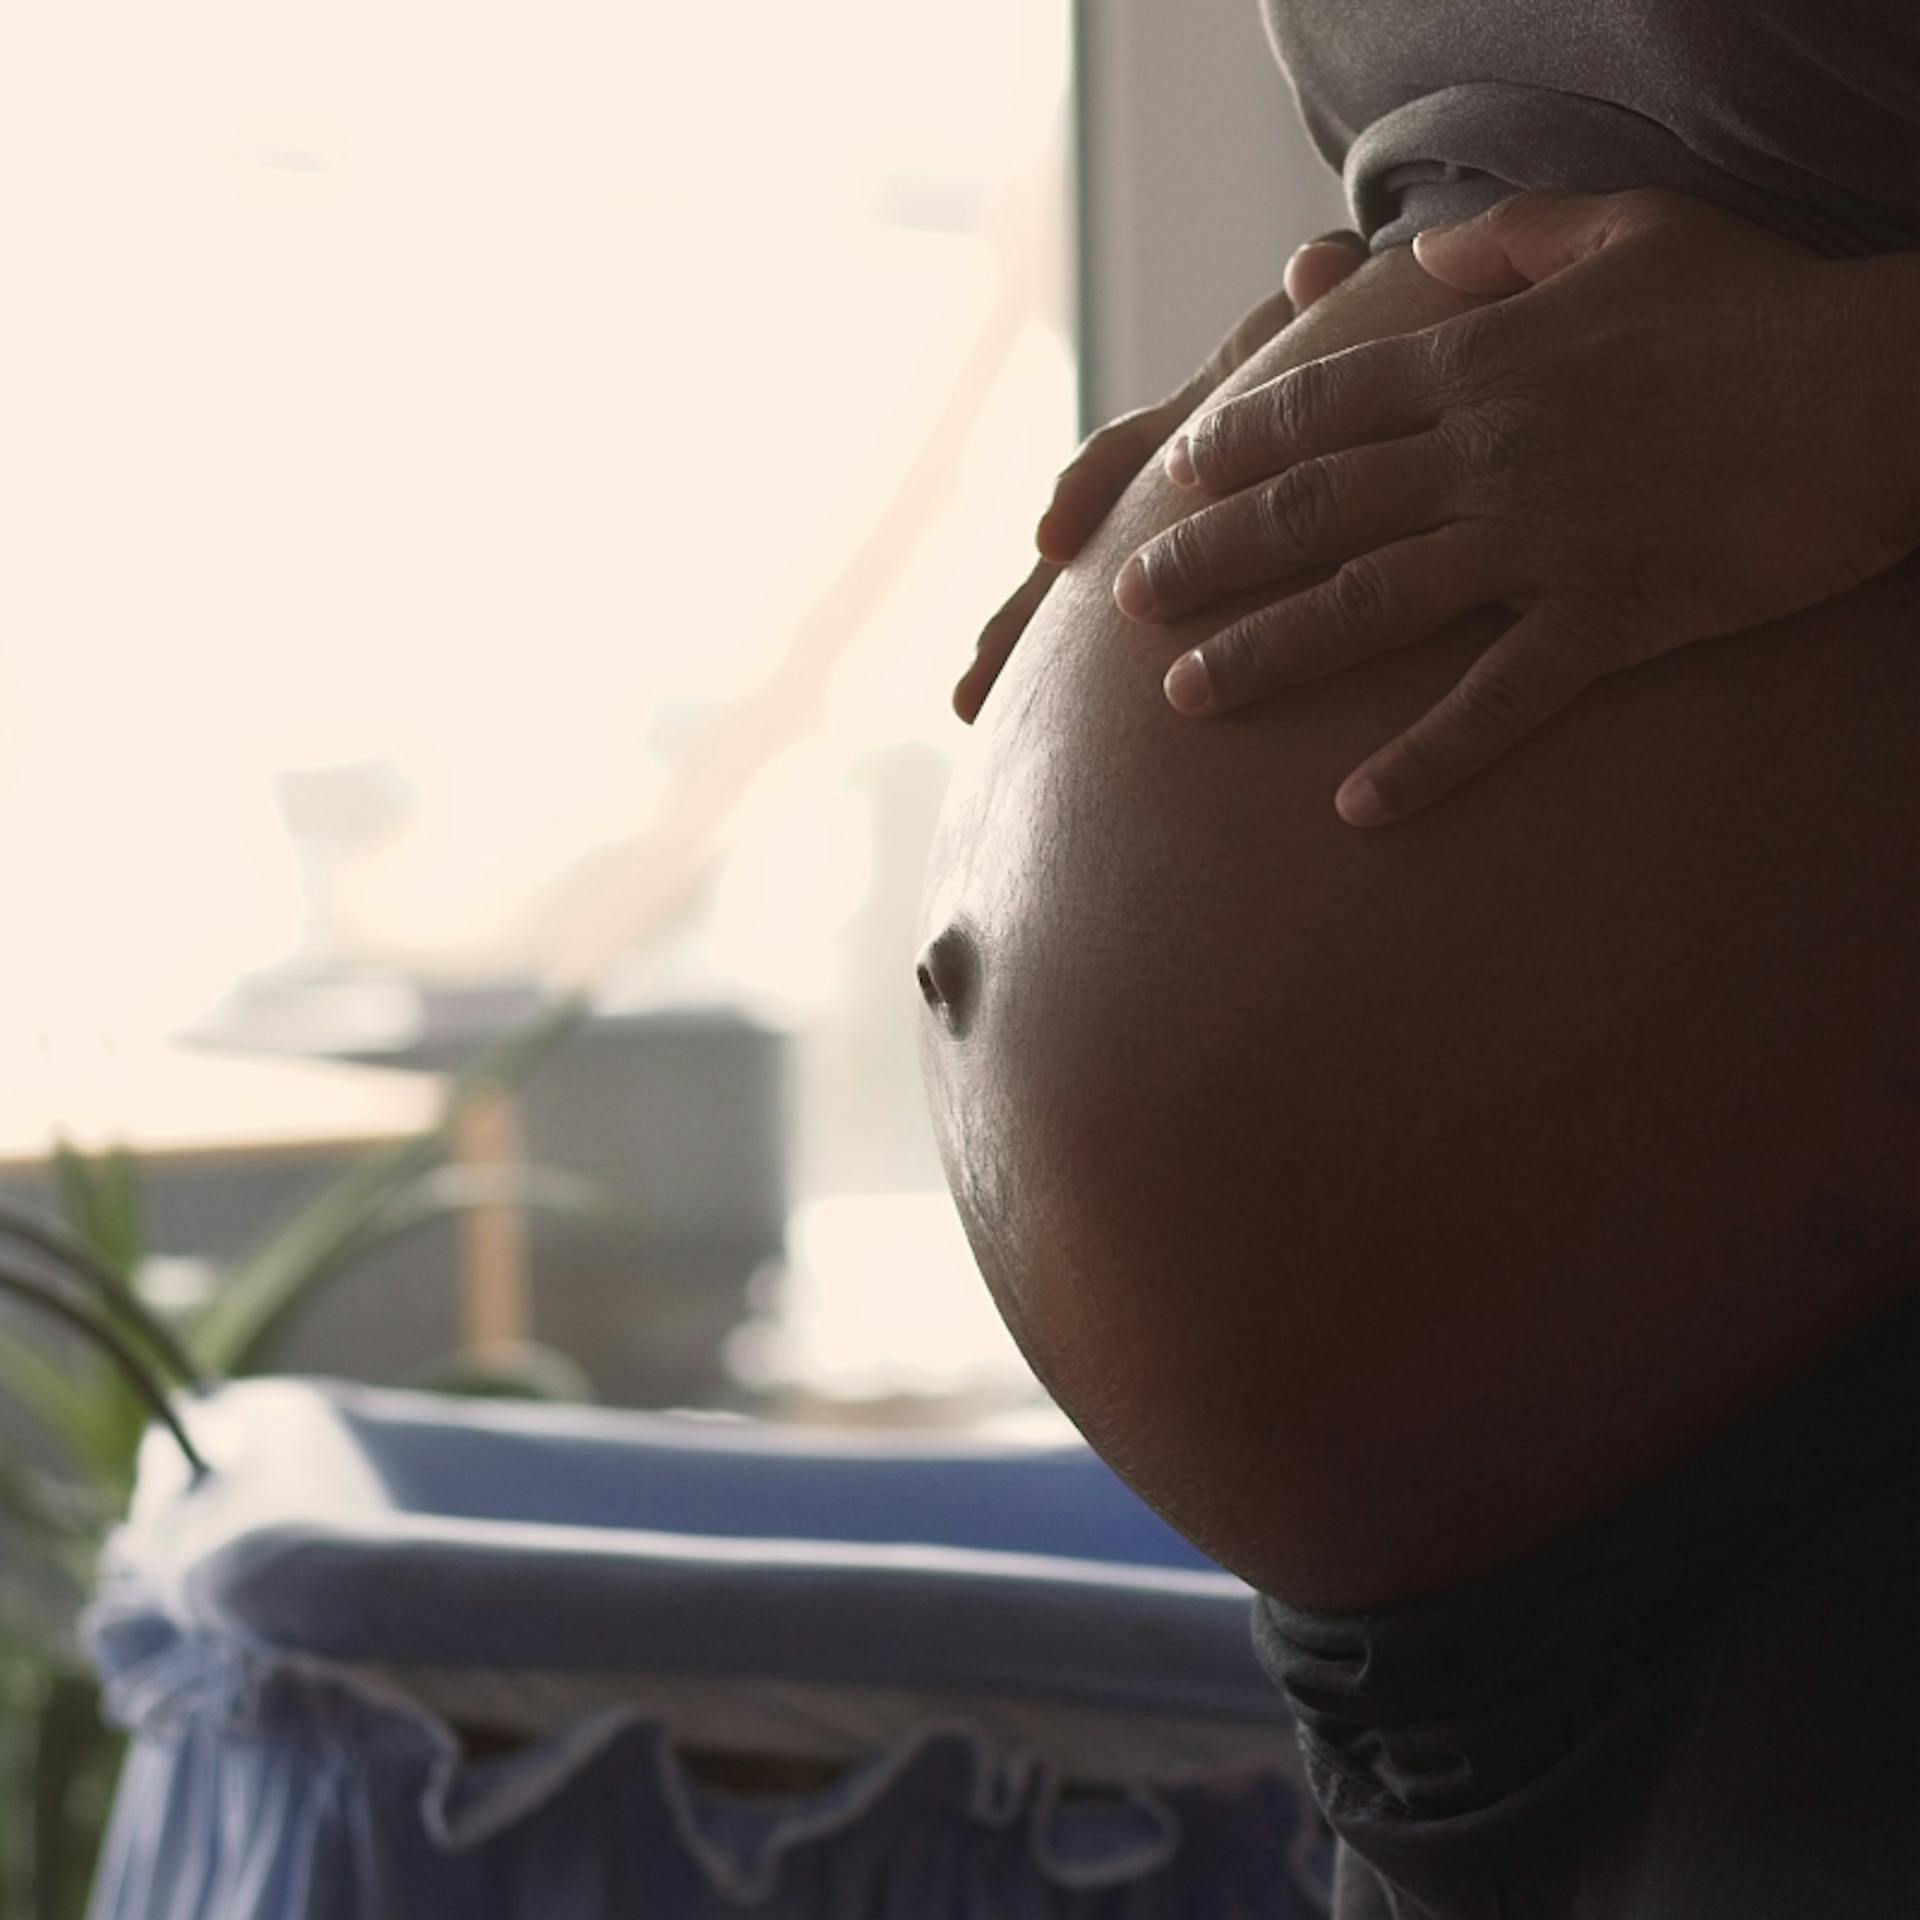 A woman worries about finding a midwife as she nears the end of her pregnancy.